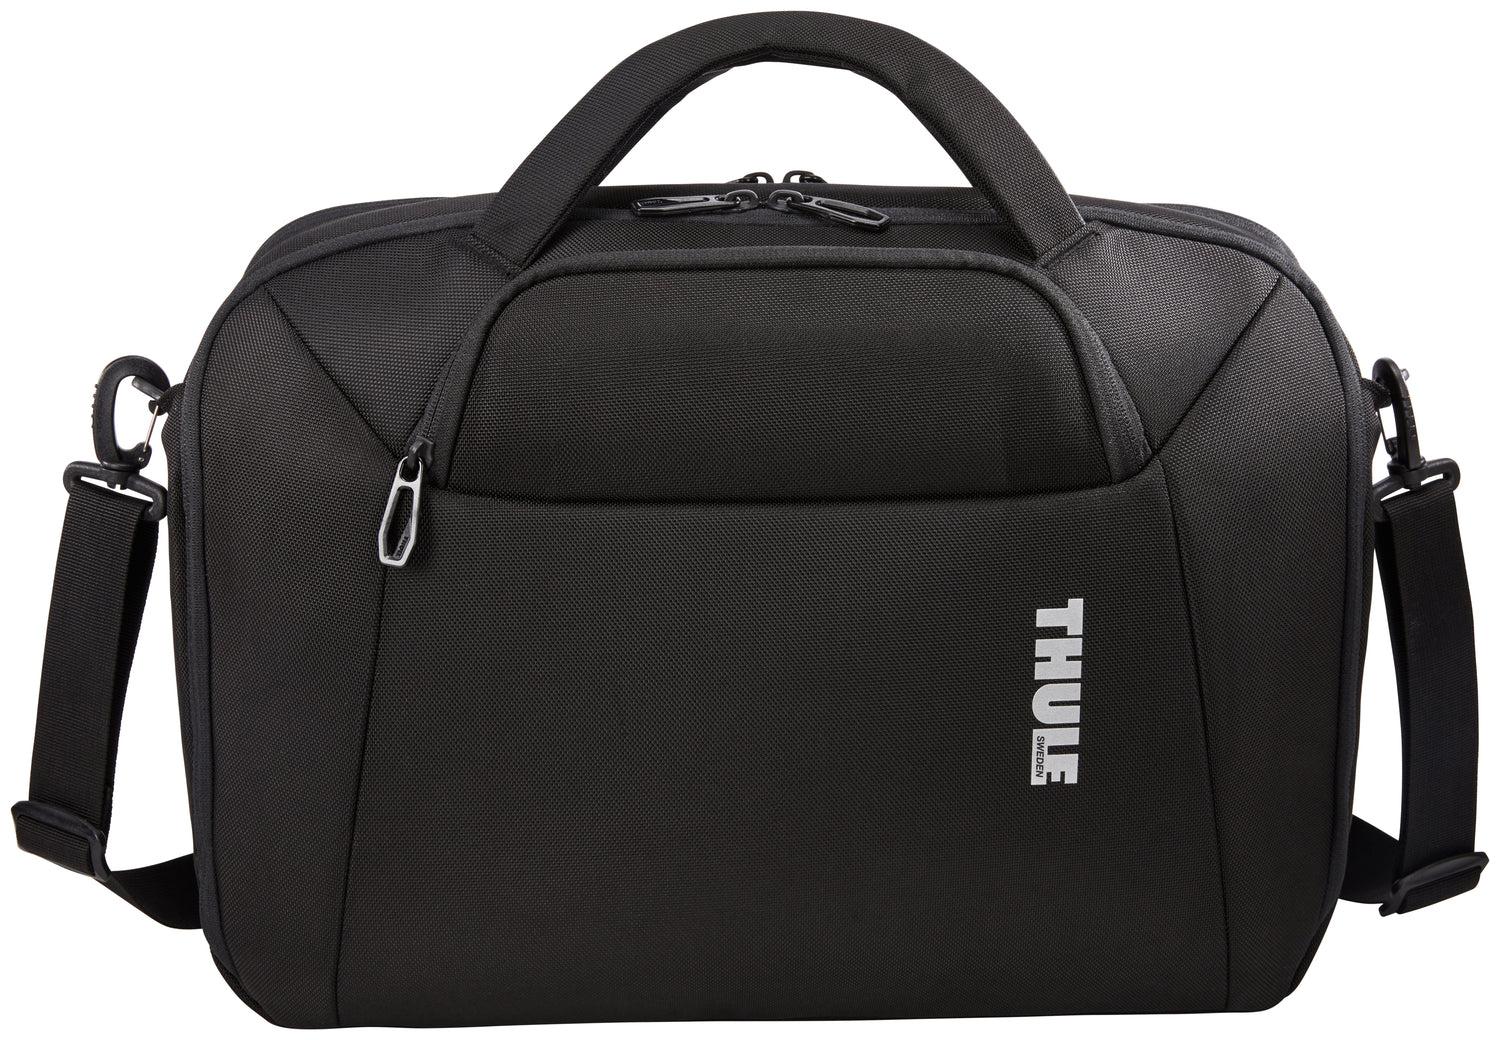 Thule Luggage Accent Laptop Bag 15.6" – Luggage Pros